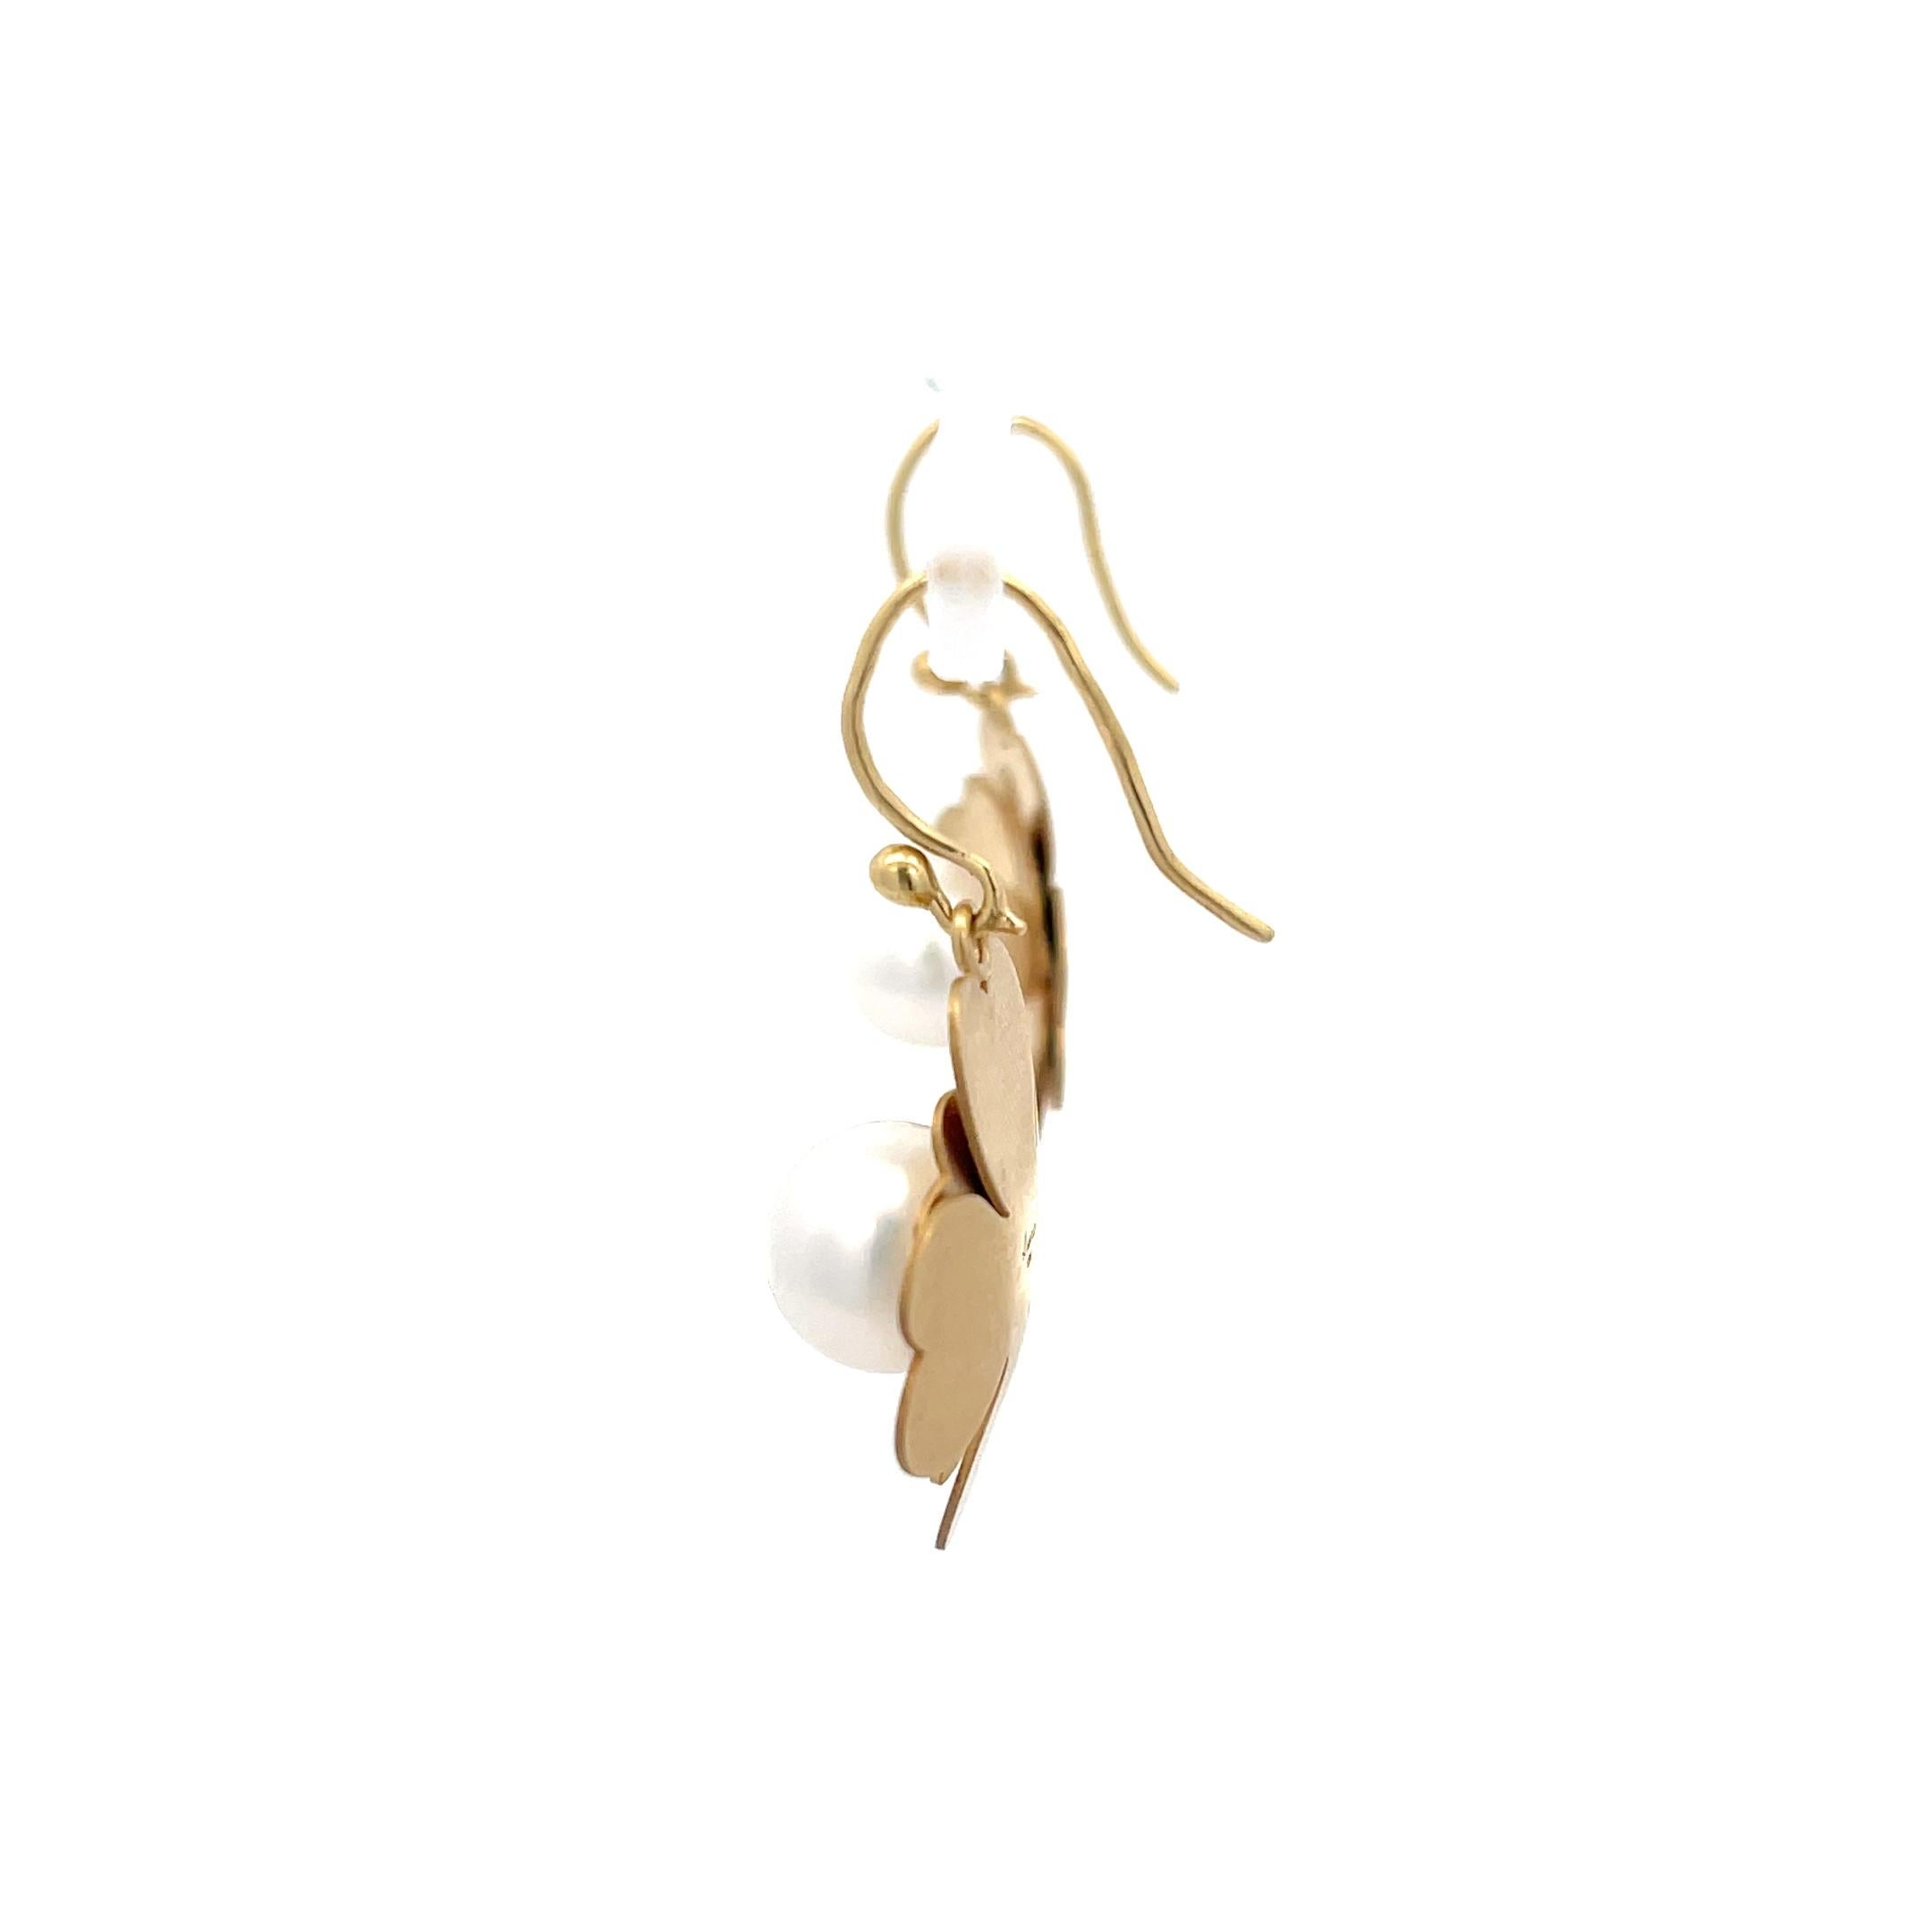 Contemporary Irene Neuwirth Akoya Pearl Flower Earring 18K Yellow Gold For Sale